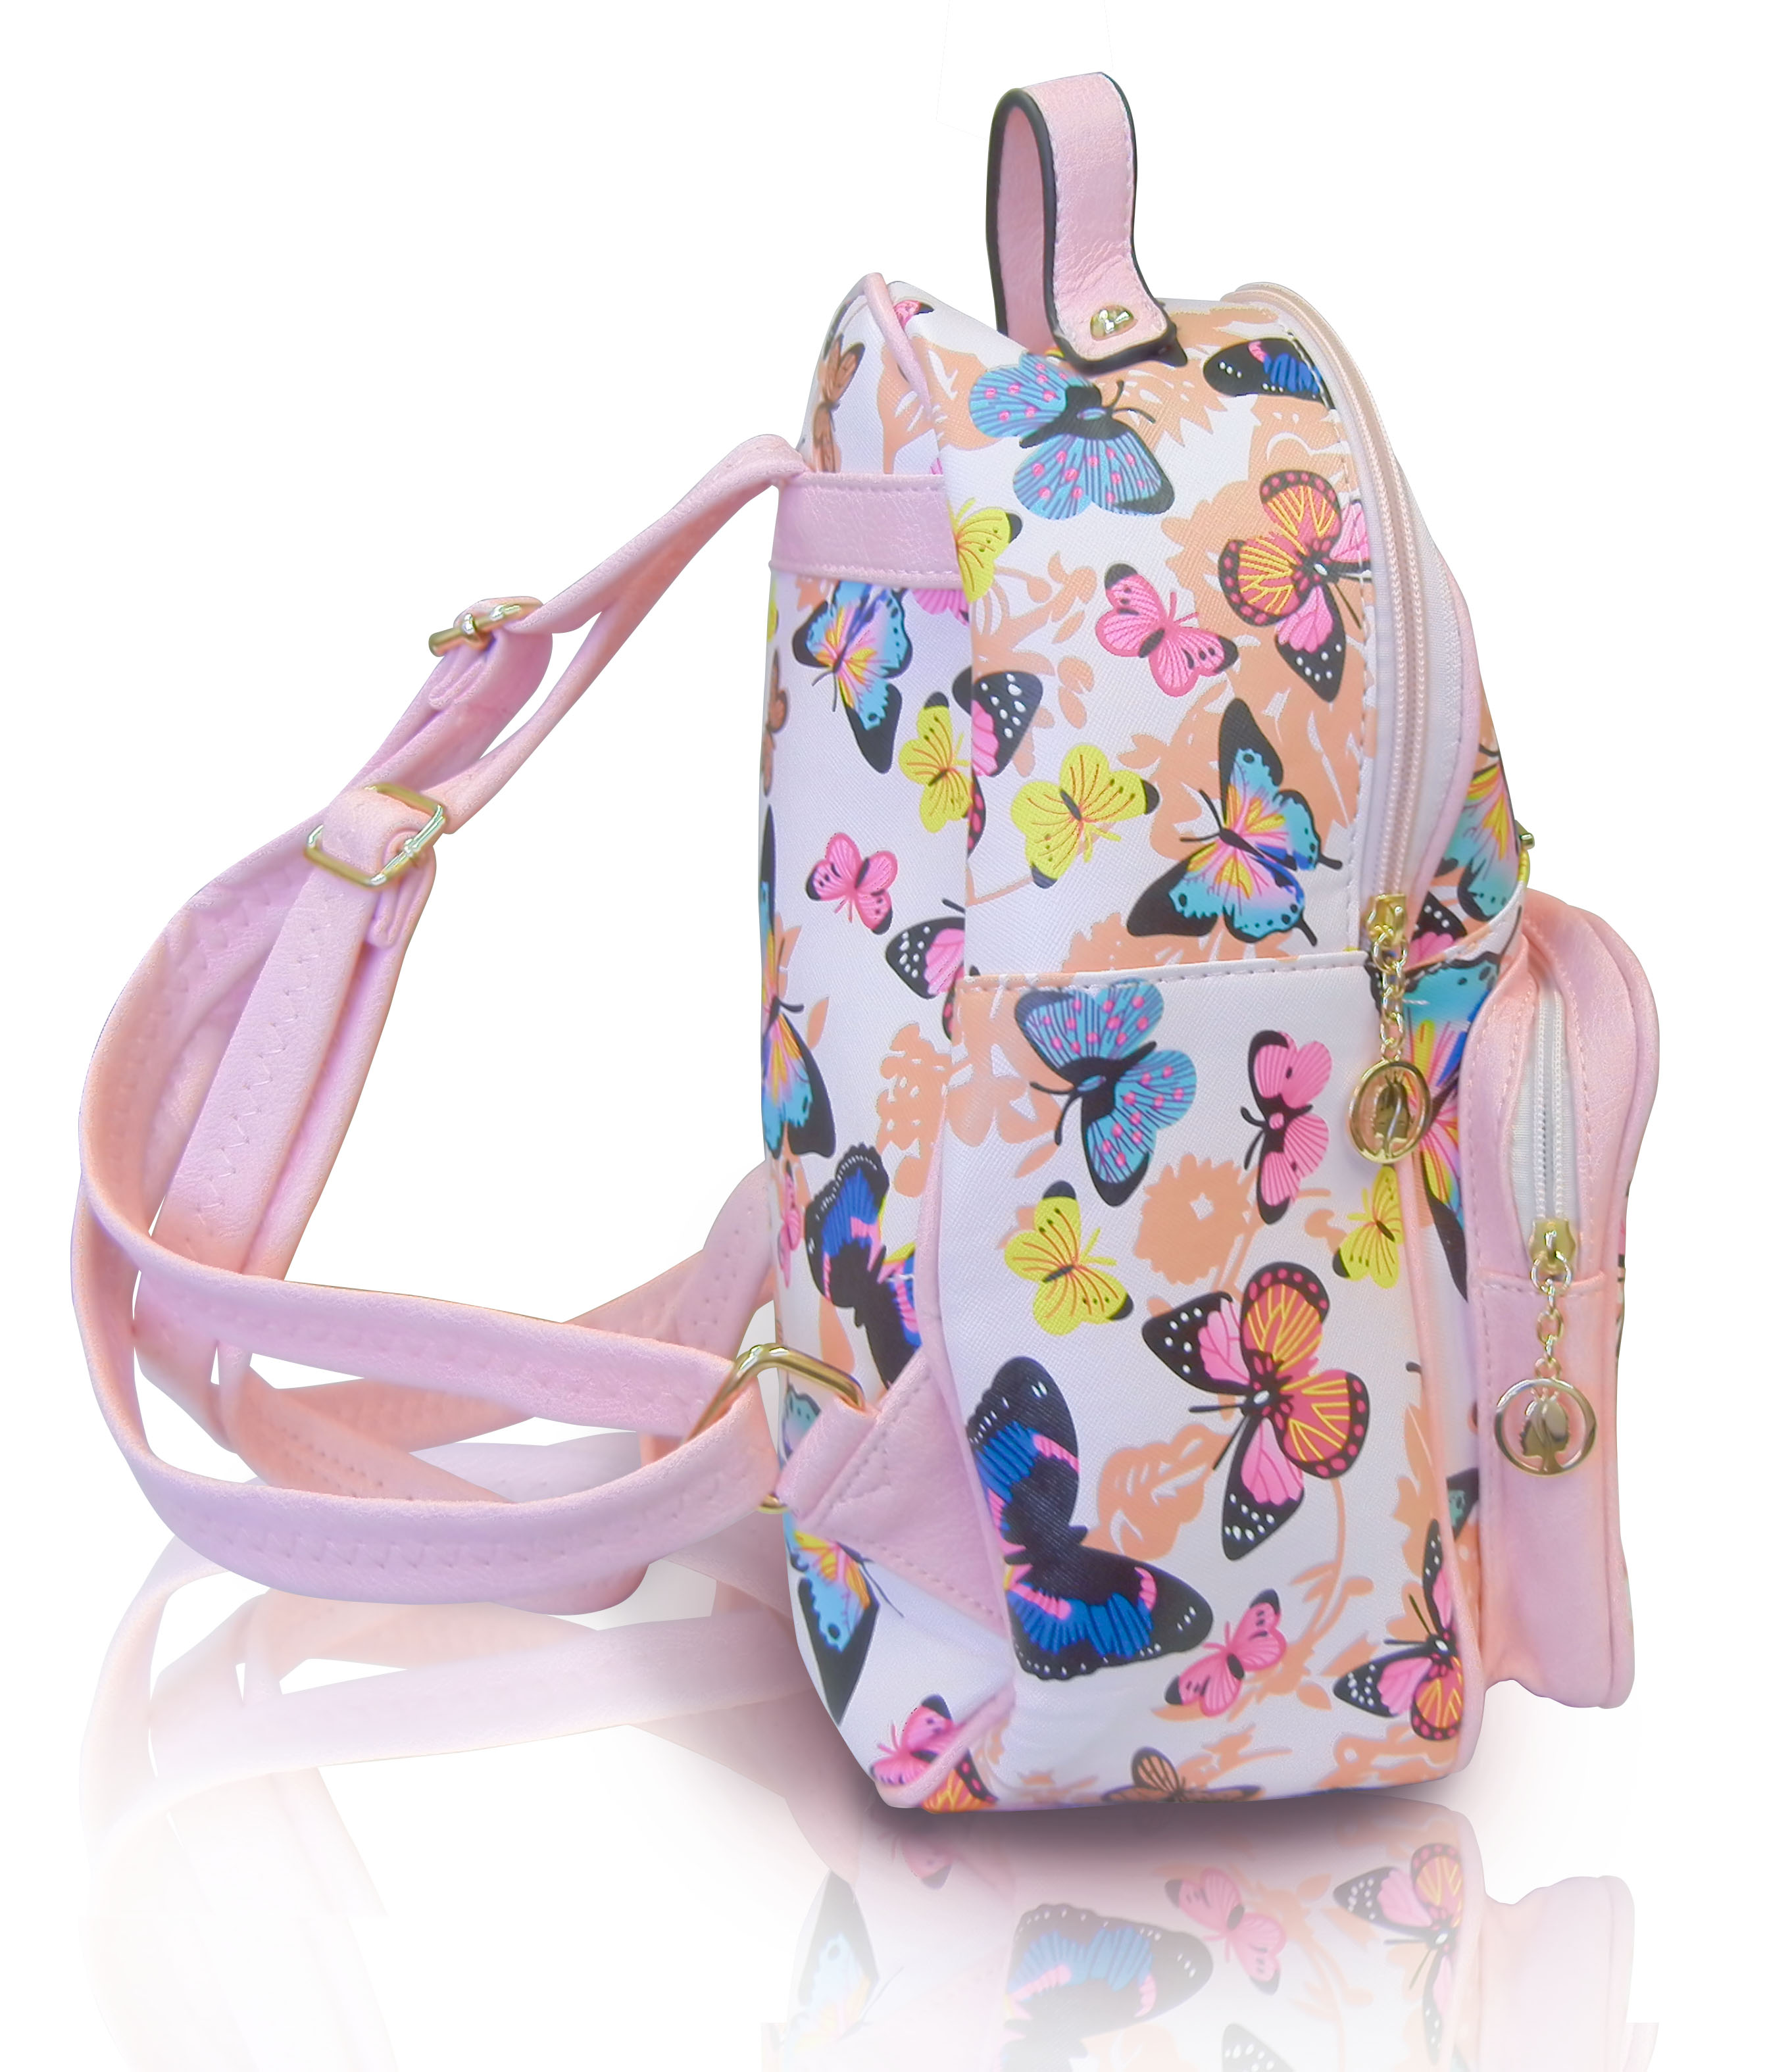 backpack for girls, pink, butterflies, bright, colorful, 